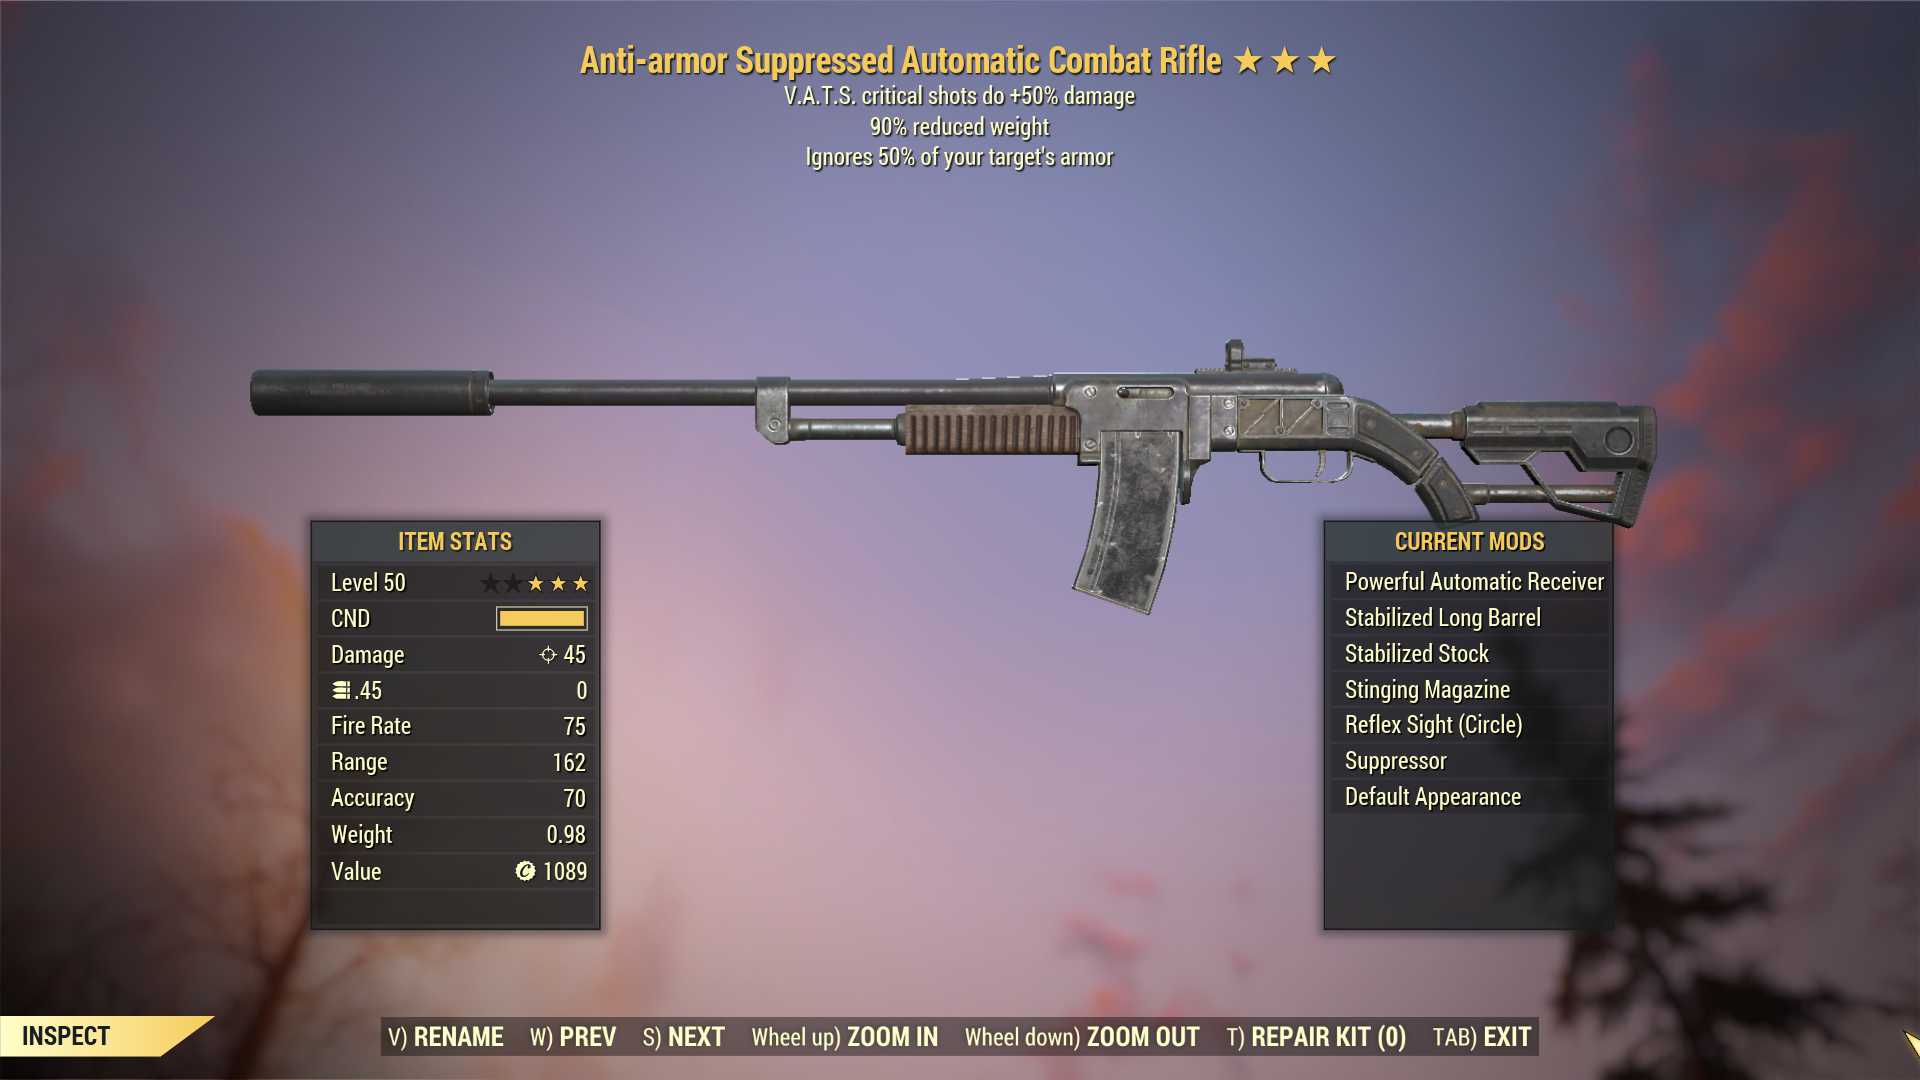 Anti-Armor Combat Rifle (+50% critical damage, 90% reduced weight)